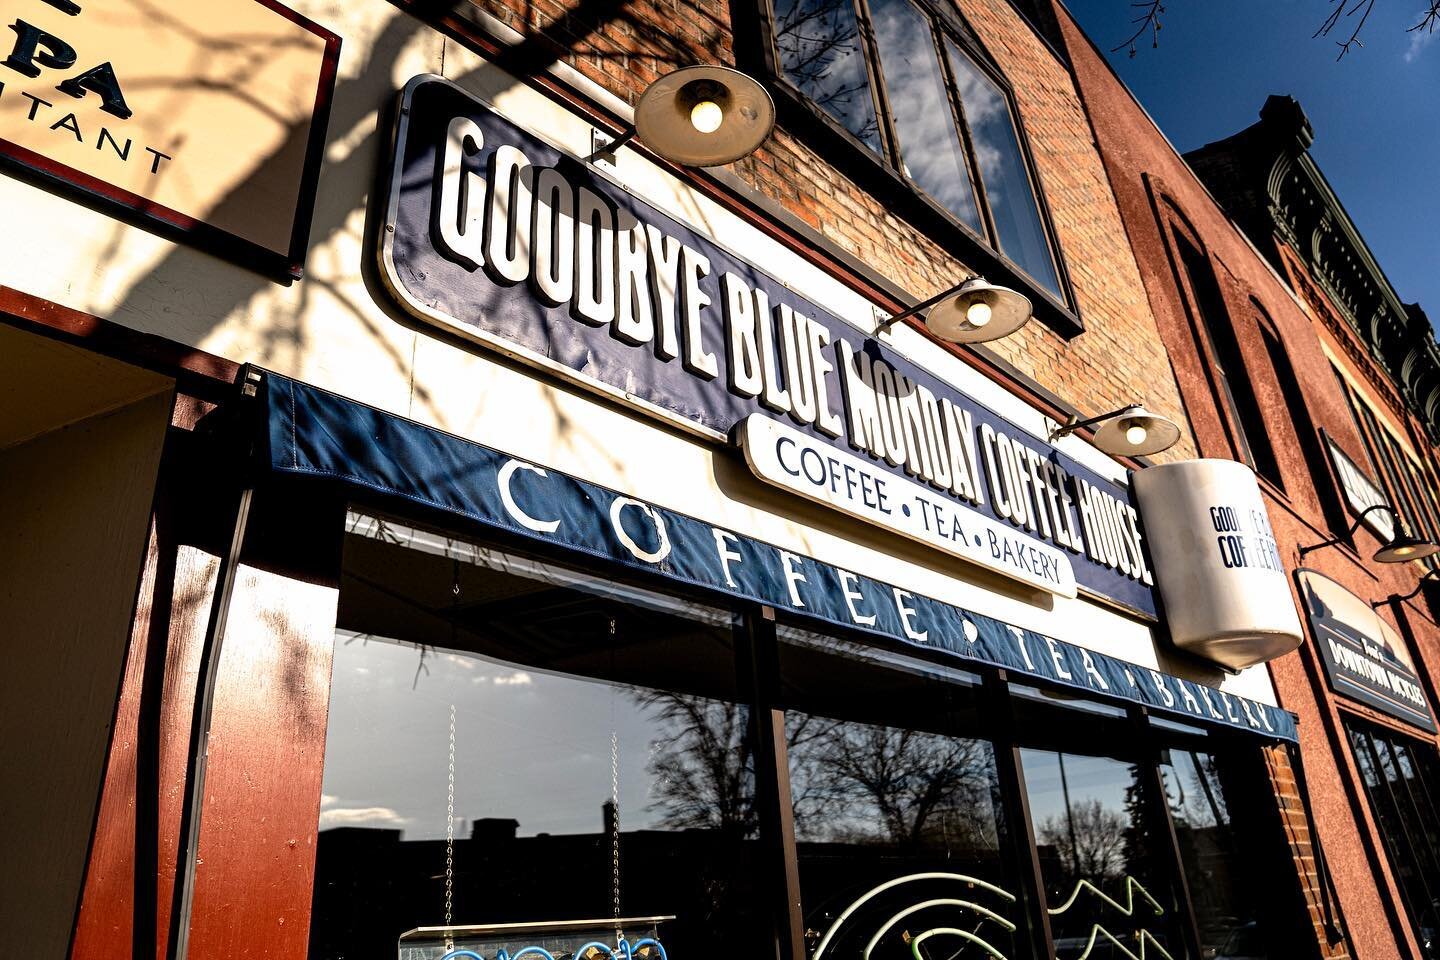 It&rsquo;s a beautiful day today! We are here and excited to see you! #goodbyebluemondaycoffeehouse #northfieldminnesota